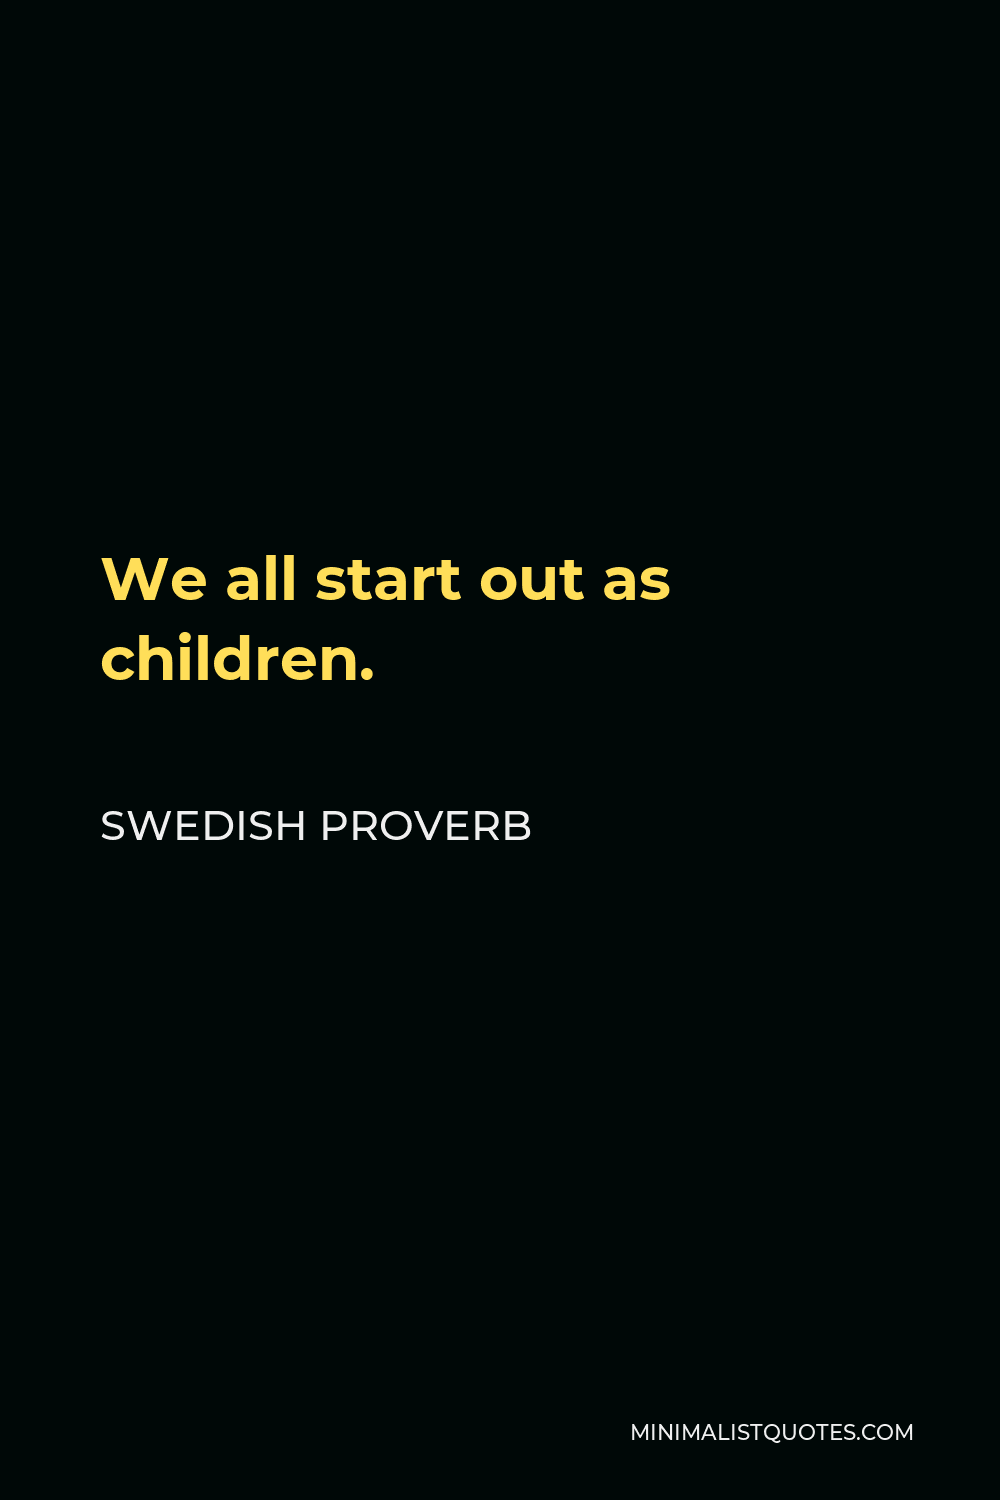 Swedish Proverb Quote - We all start out as children.